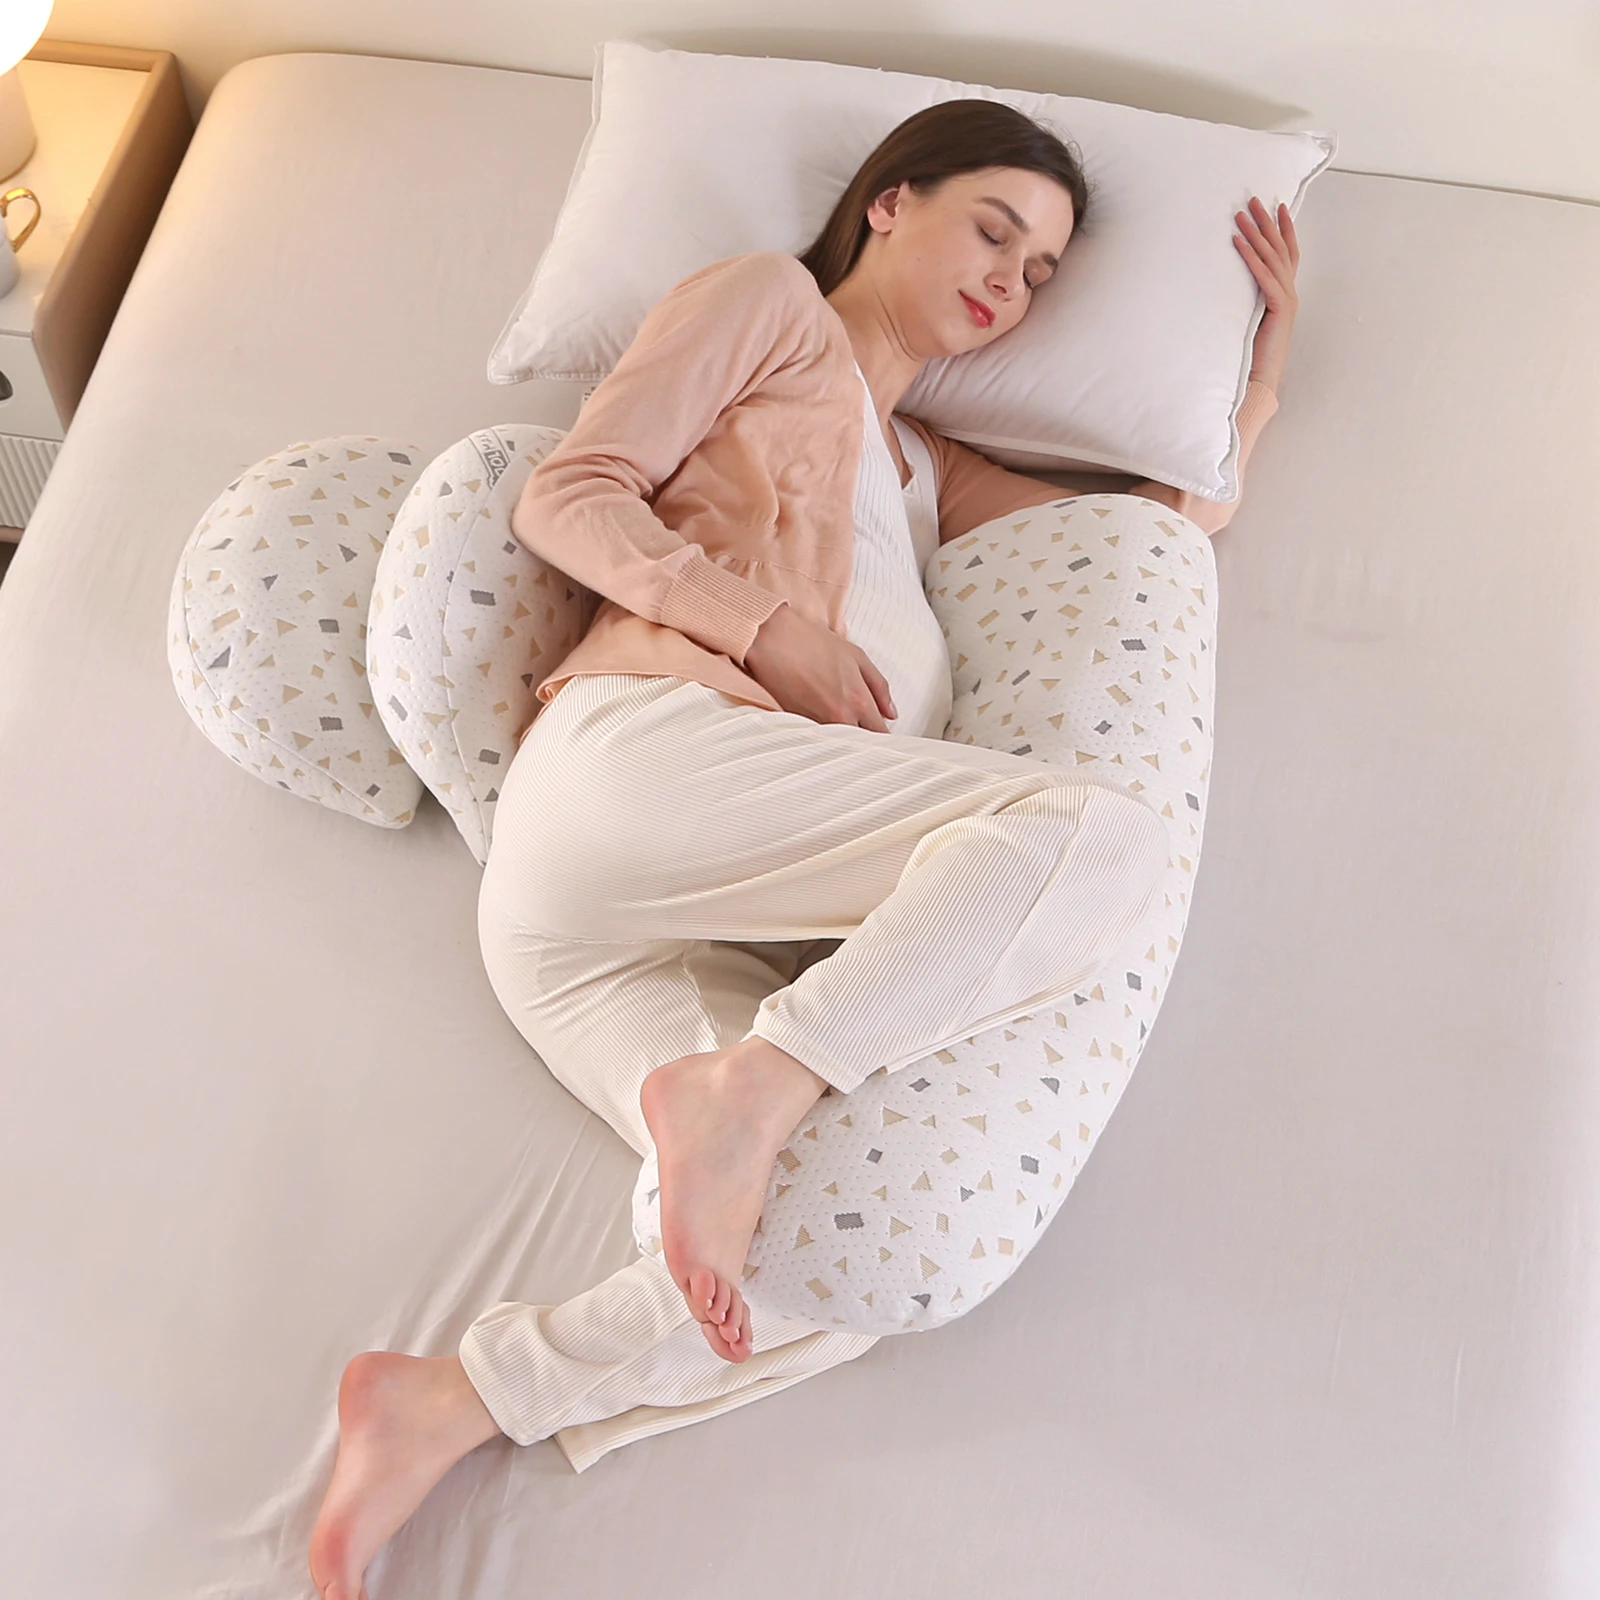 Pregnancy Pillows for Pregnant Women Pregnant Cushion Sleeping Pillow On The Side U Self Body Pillow Waist Protection